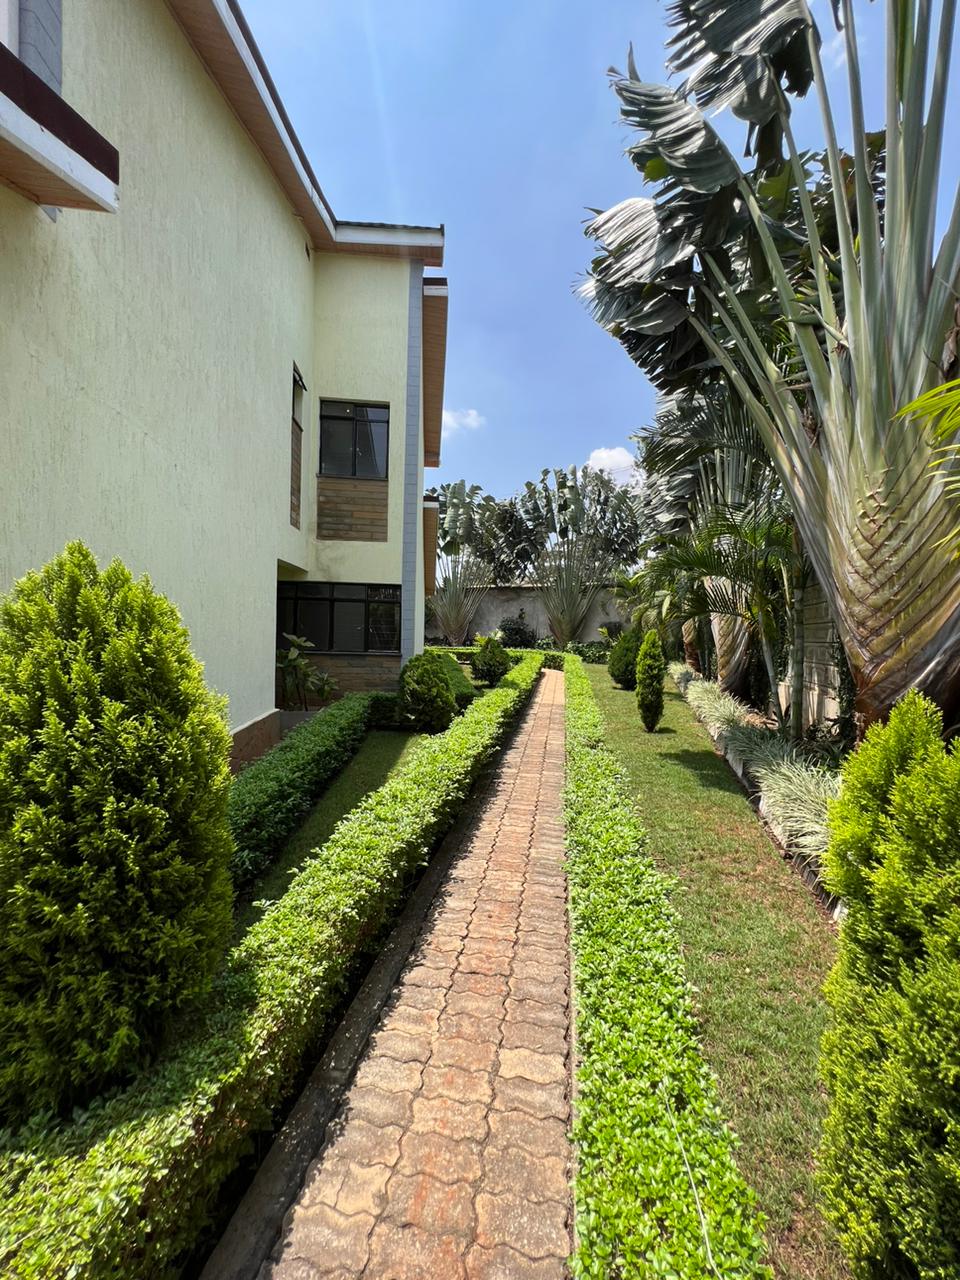 5 bedroom plus dsq house for sale in the leafy suburb of muthaiga north. In a gated community. Sitting on 1/4acre land. Sale at 60Million Musilli Homes